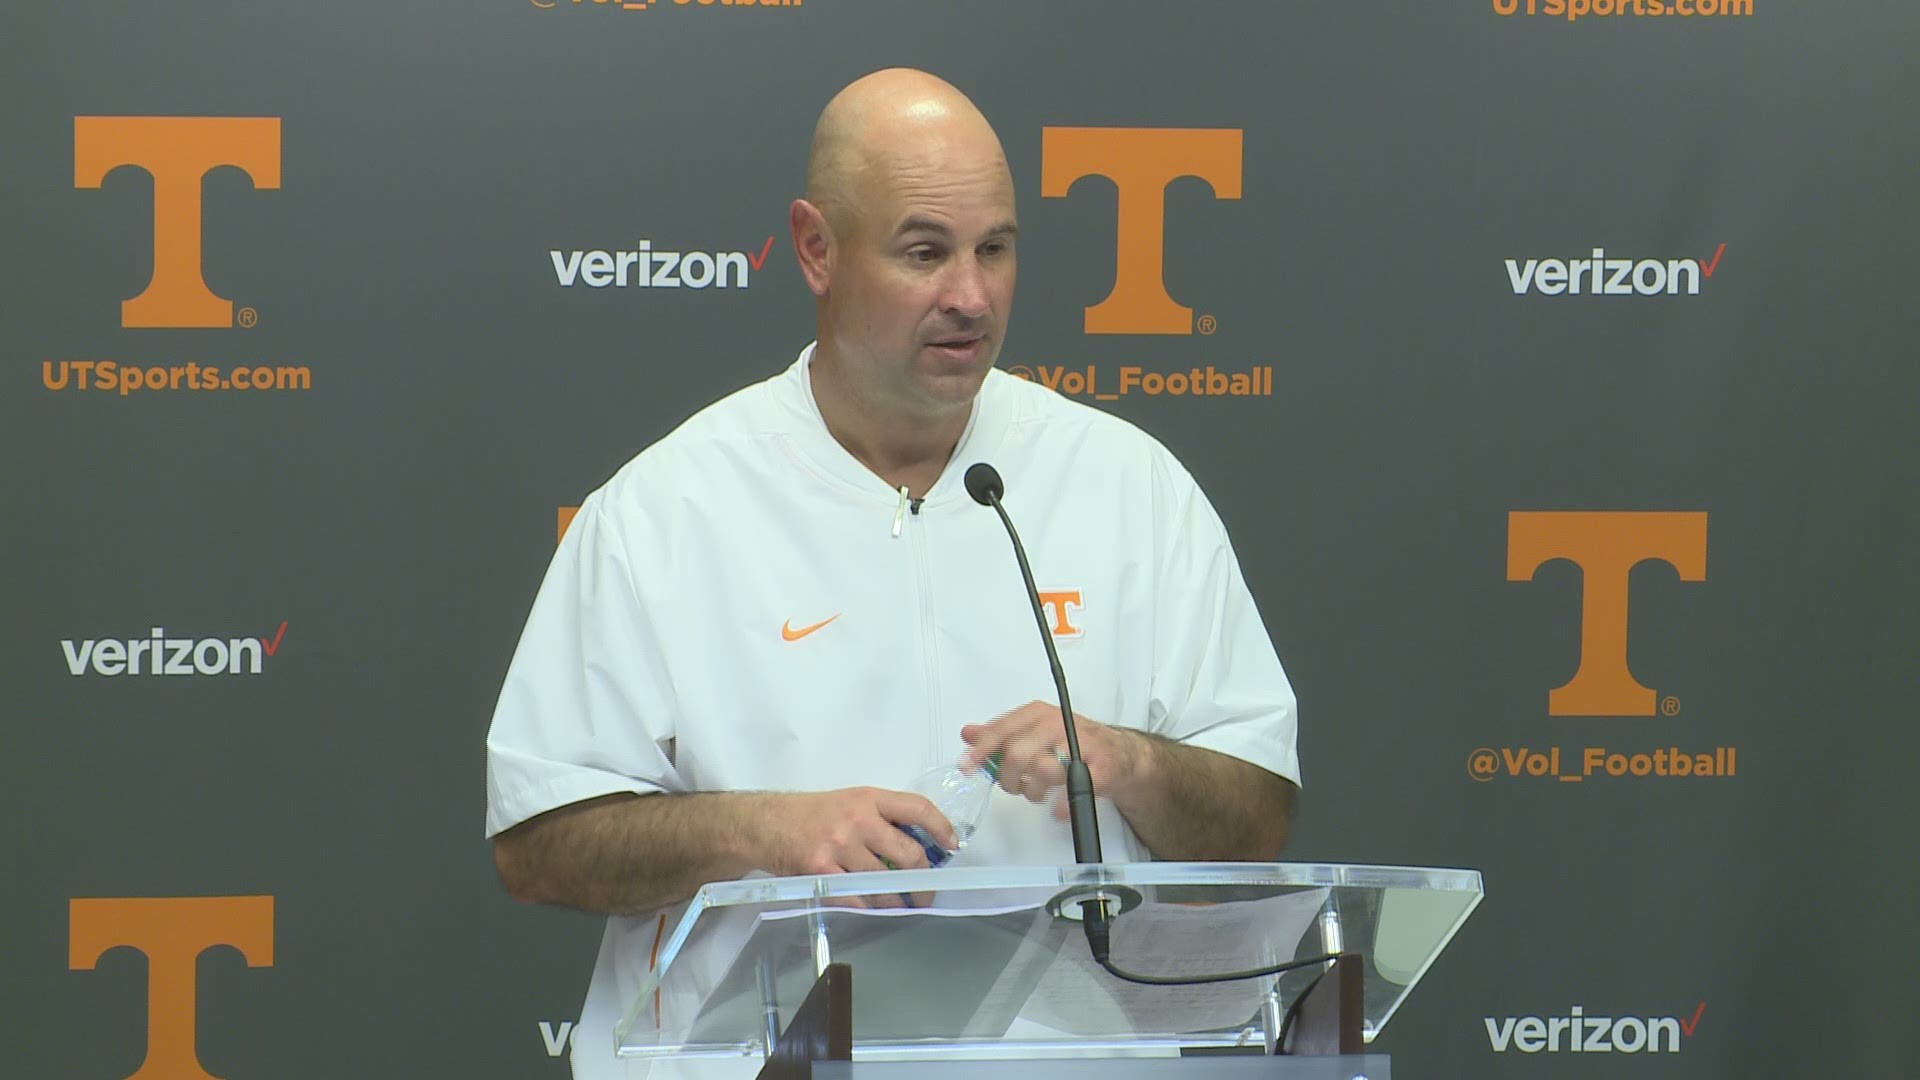 Tennessee head coach Jeremy Pruitt said he asked the linebacker to leave the field after he would not enter the game when asked.